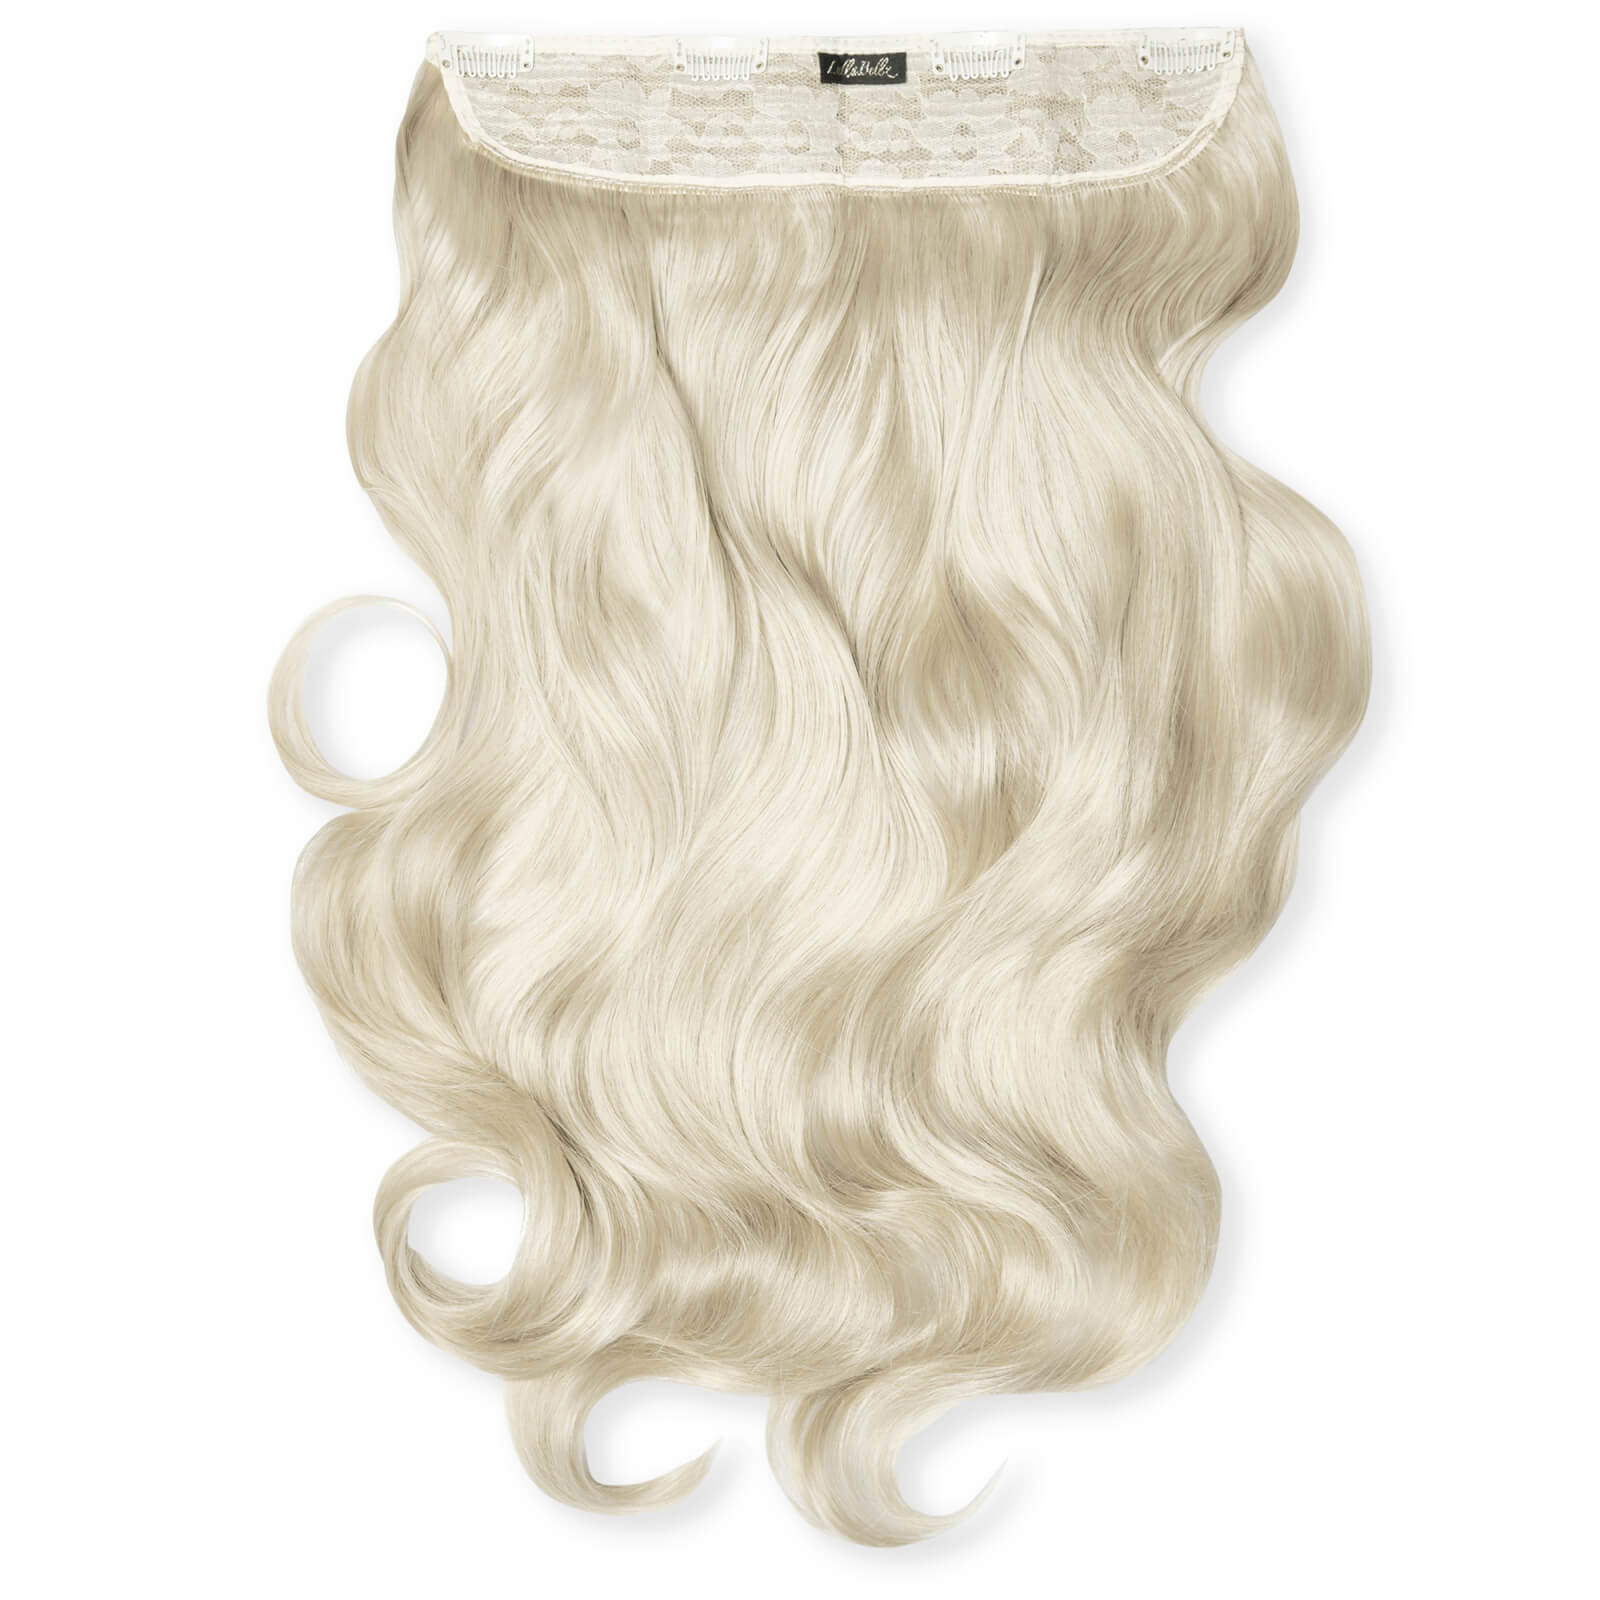 LullaBellz Thick 20 1-Piece Curly Clip in Hair Extensions (Various Colours) - Bleach Blonde